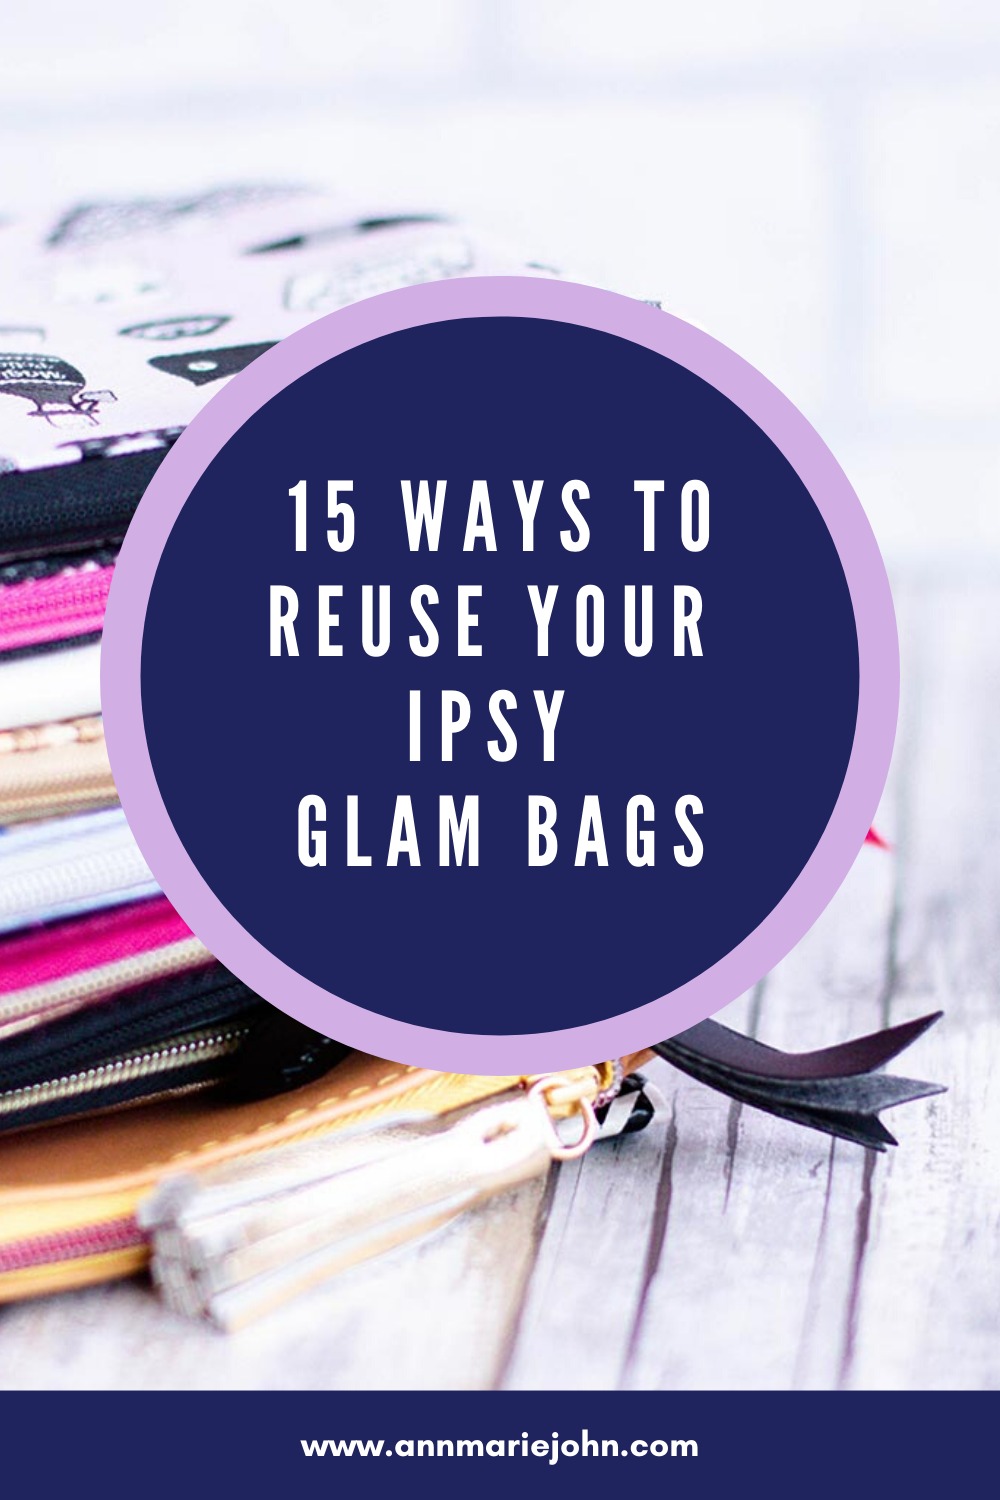 15 Ways to Reuse your Ipsy Glam Bags